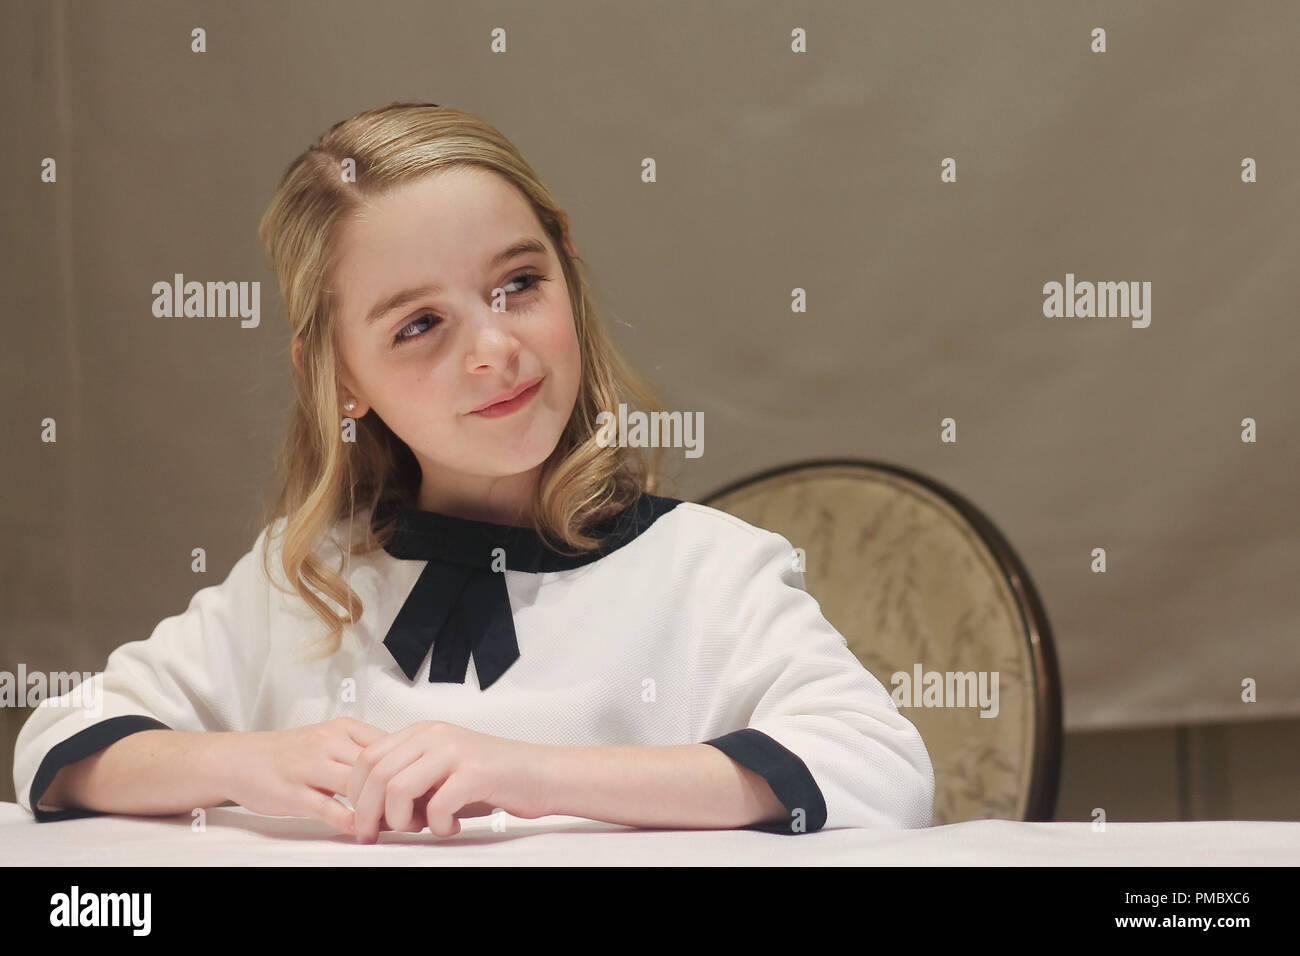 Mckenna Grace at 'Gifted' Press Conference held on March 31, 2017 at the Four Seasons Hotel in Beverly Hills,  California. No Tabloids. No USA sales for 30 days of origination.  File Reference # 33282 006JRC  For Editorial Use Only -  All Rights Reserved Stock Photo